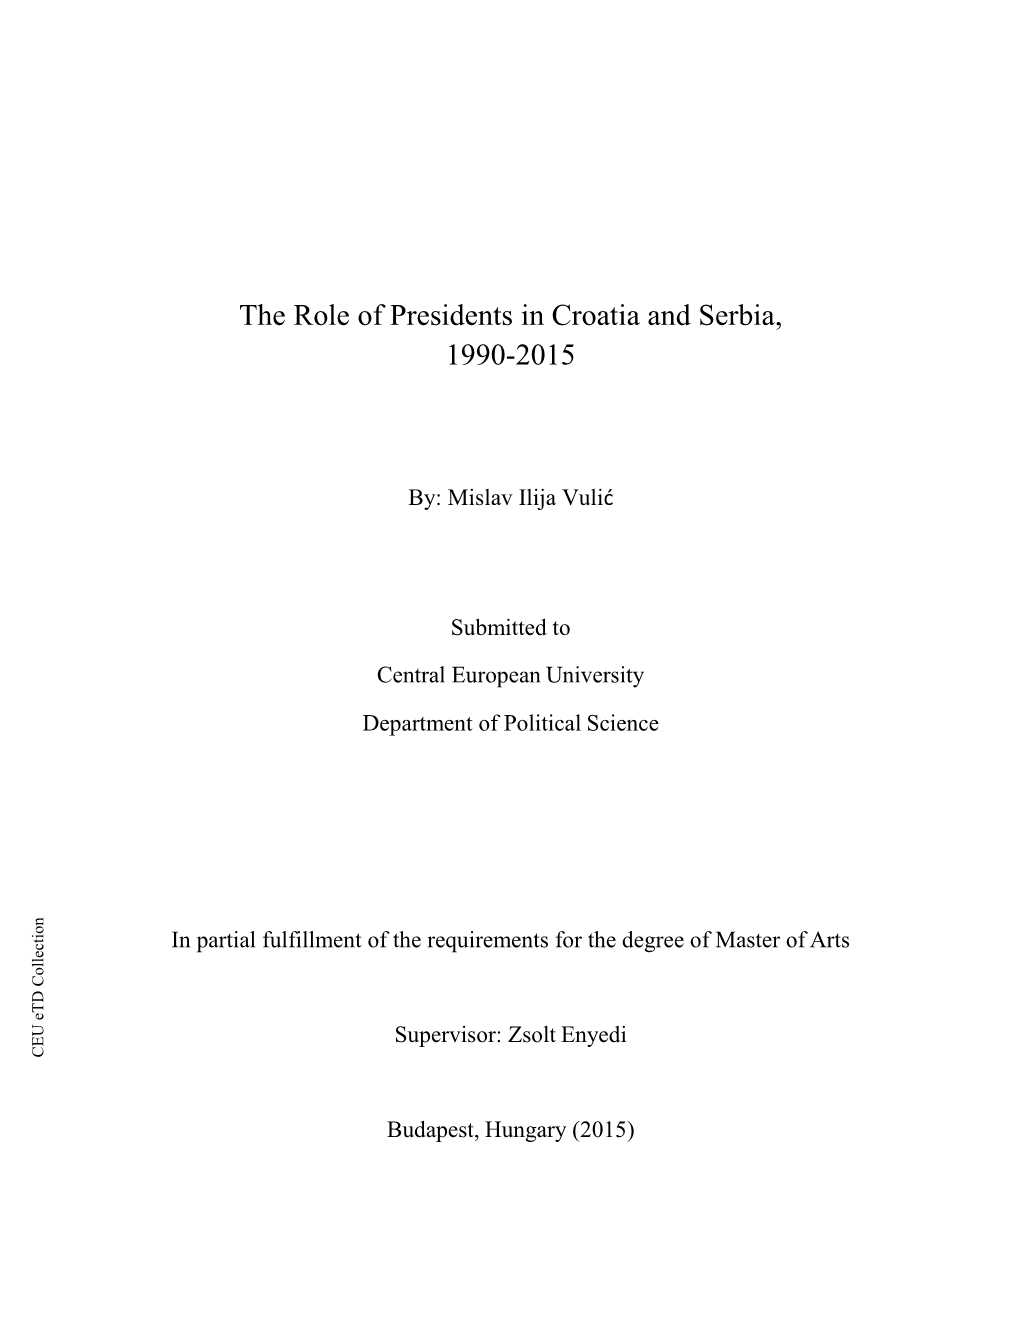 The Role of Presidents in Croatia and Serbia, 1990-2015